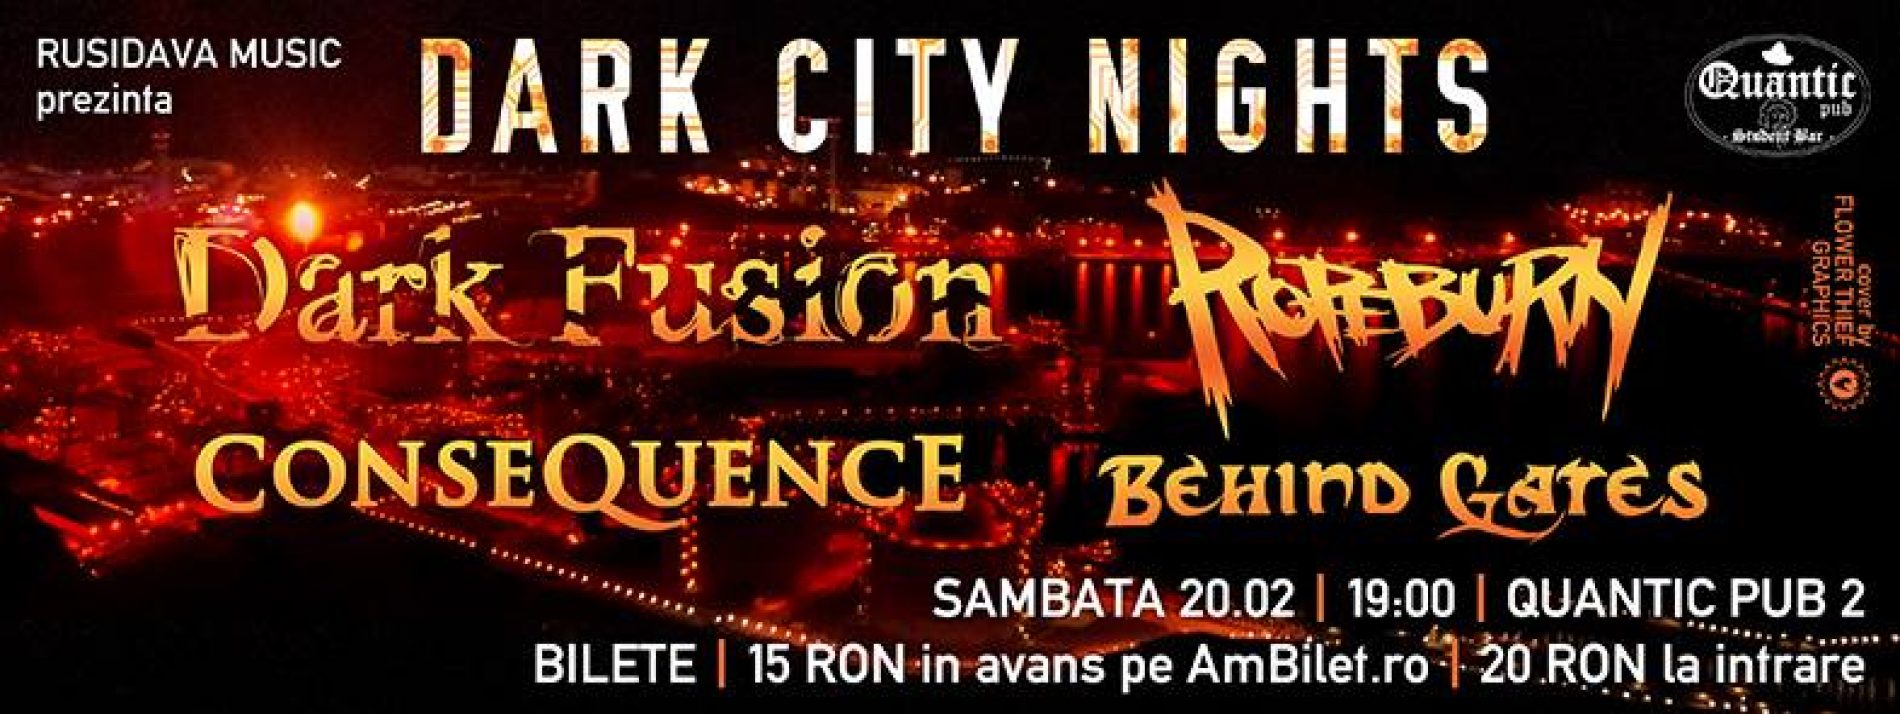 Concert Dark Fusion, Ropeburn, Consequence si Behind Gates in Quantic 2